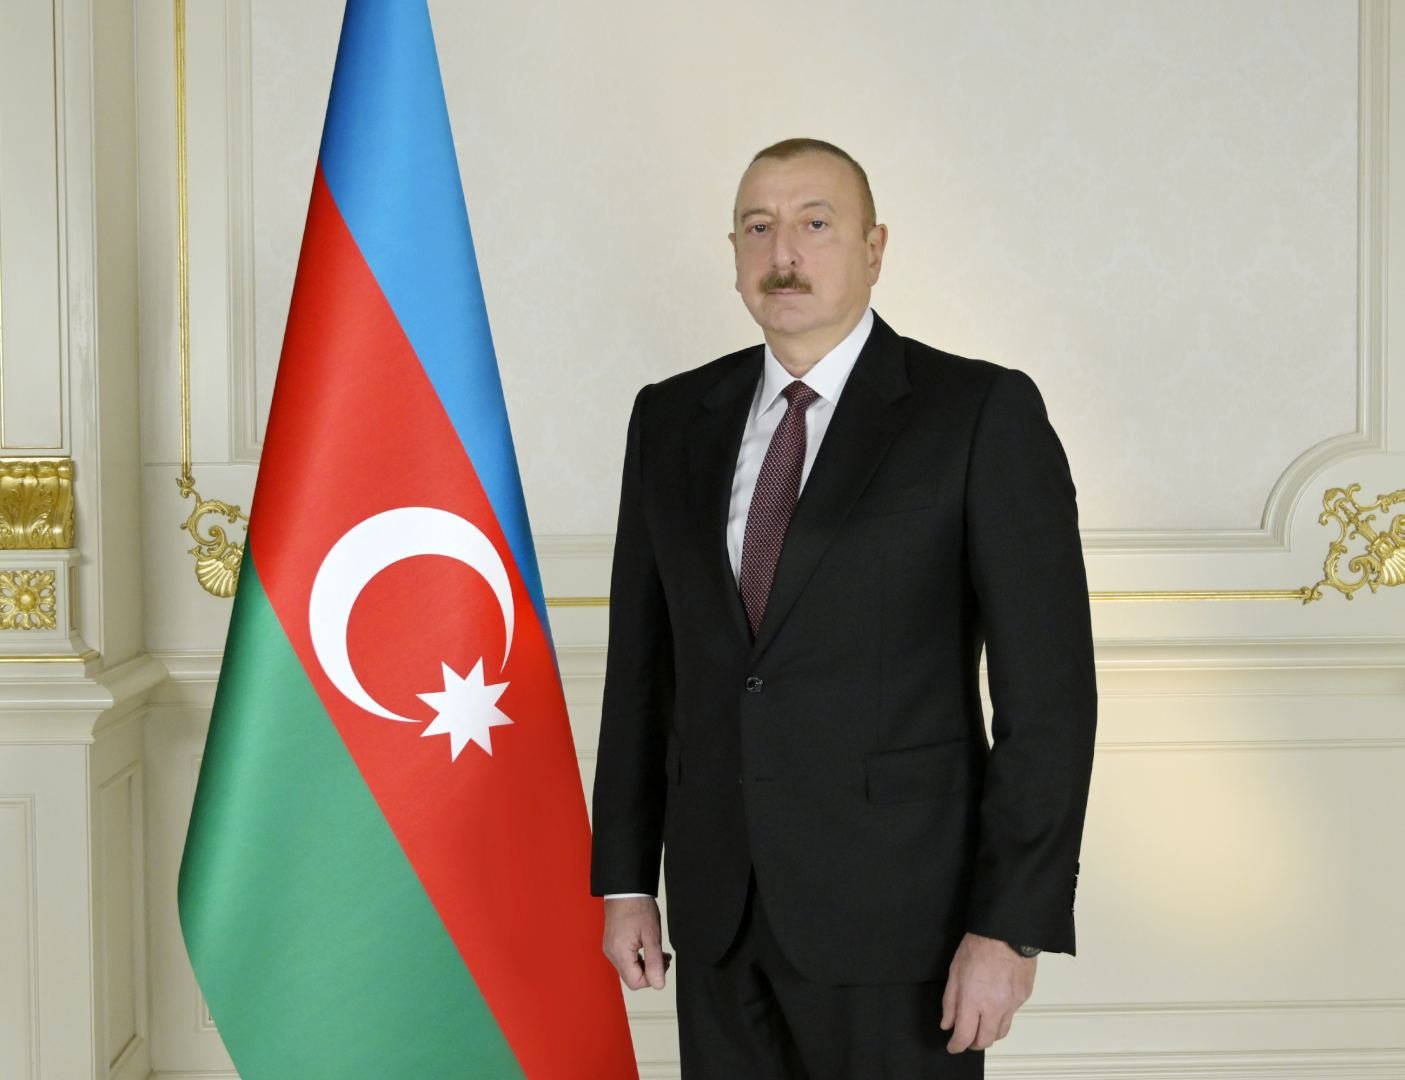 Important to demonstrate impartial approach in normalization process between Armenia and Azerbaijan - President Ilham Aliyev